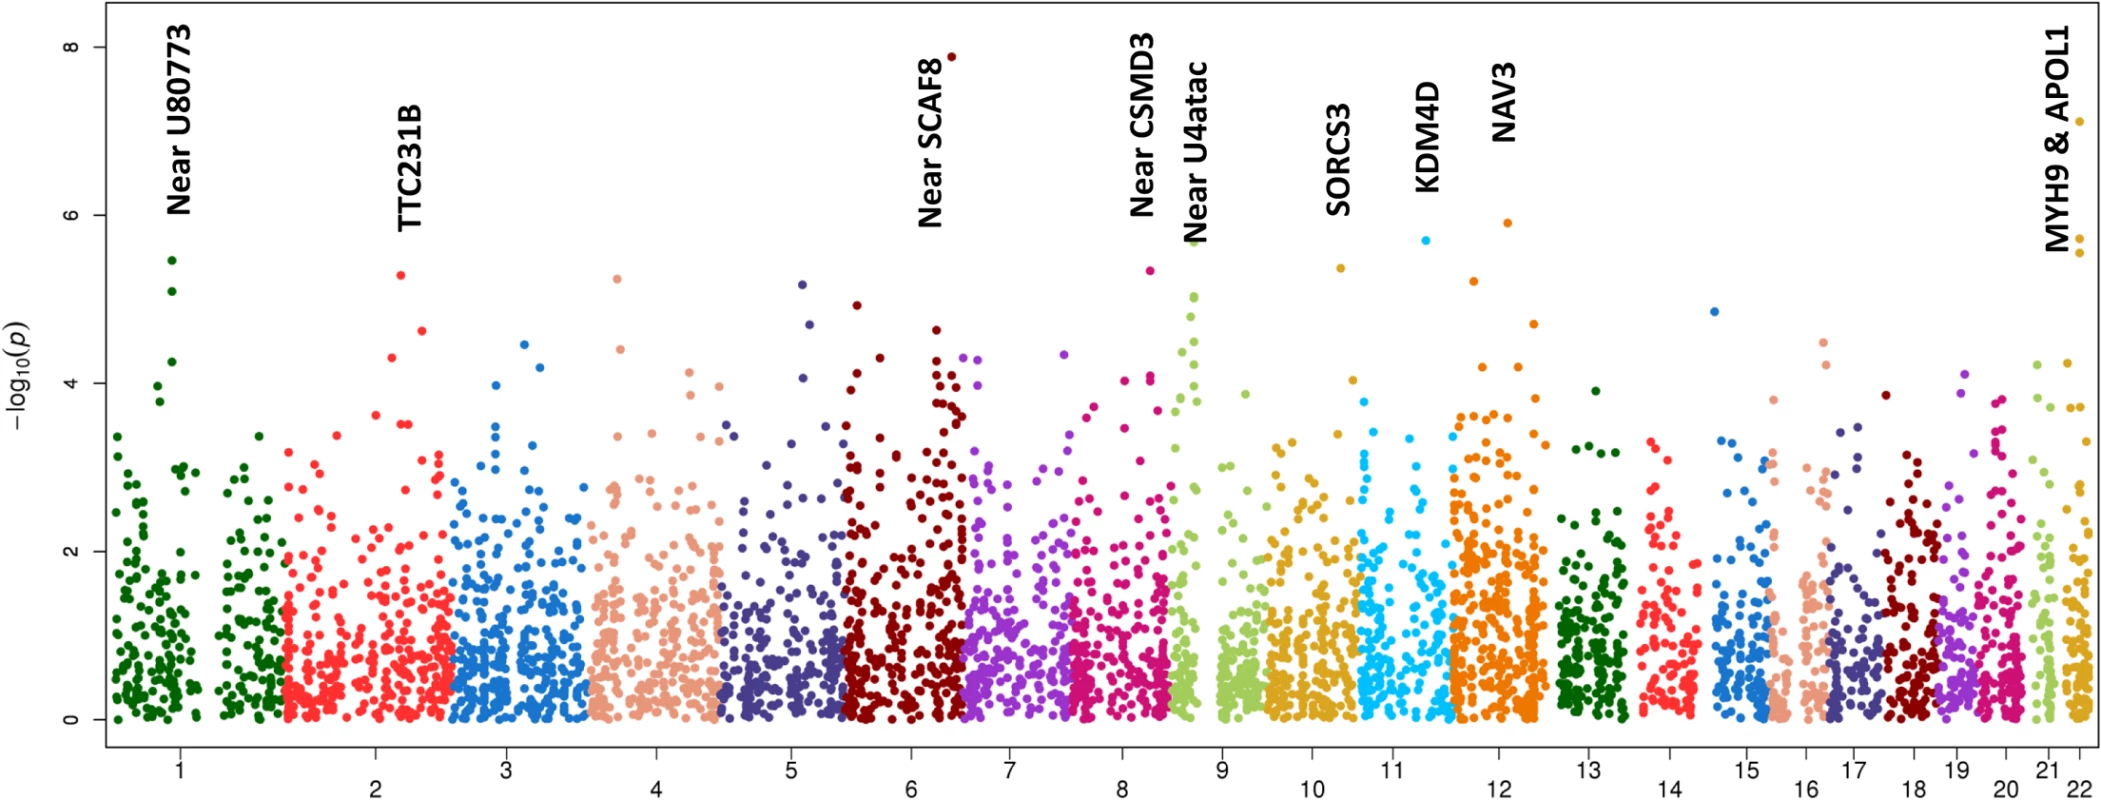 Manhattan plot of FIND GWAS meta-analysis associations across ancestries included in Discovery and Replication samples.